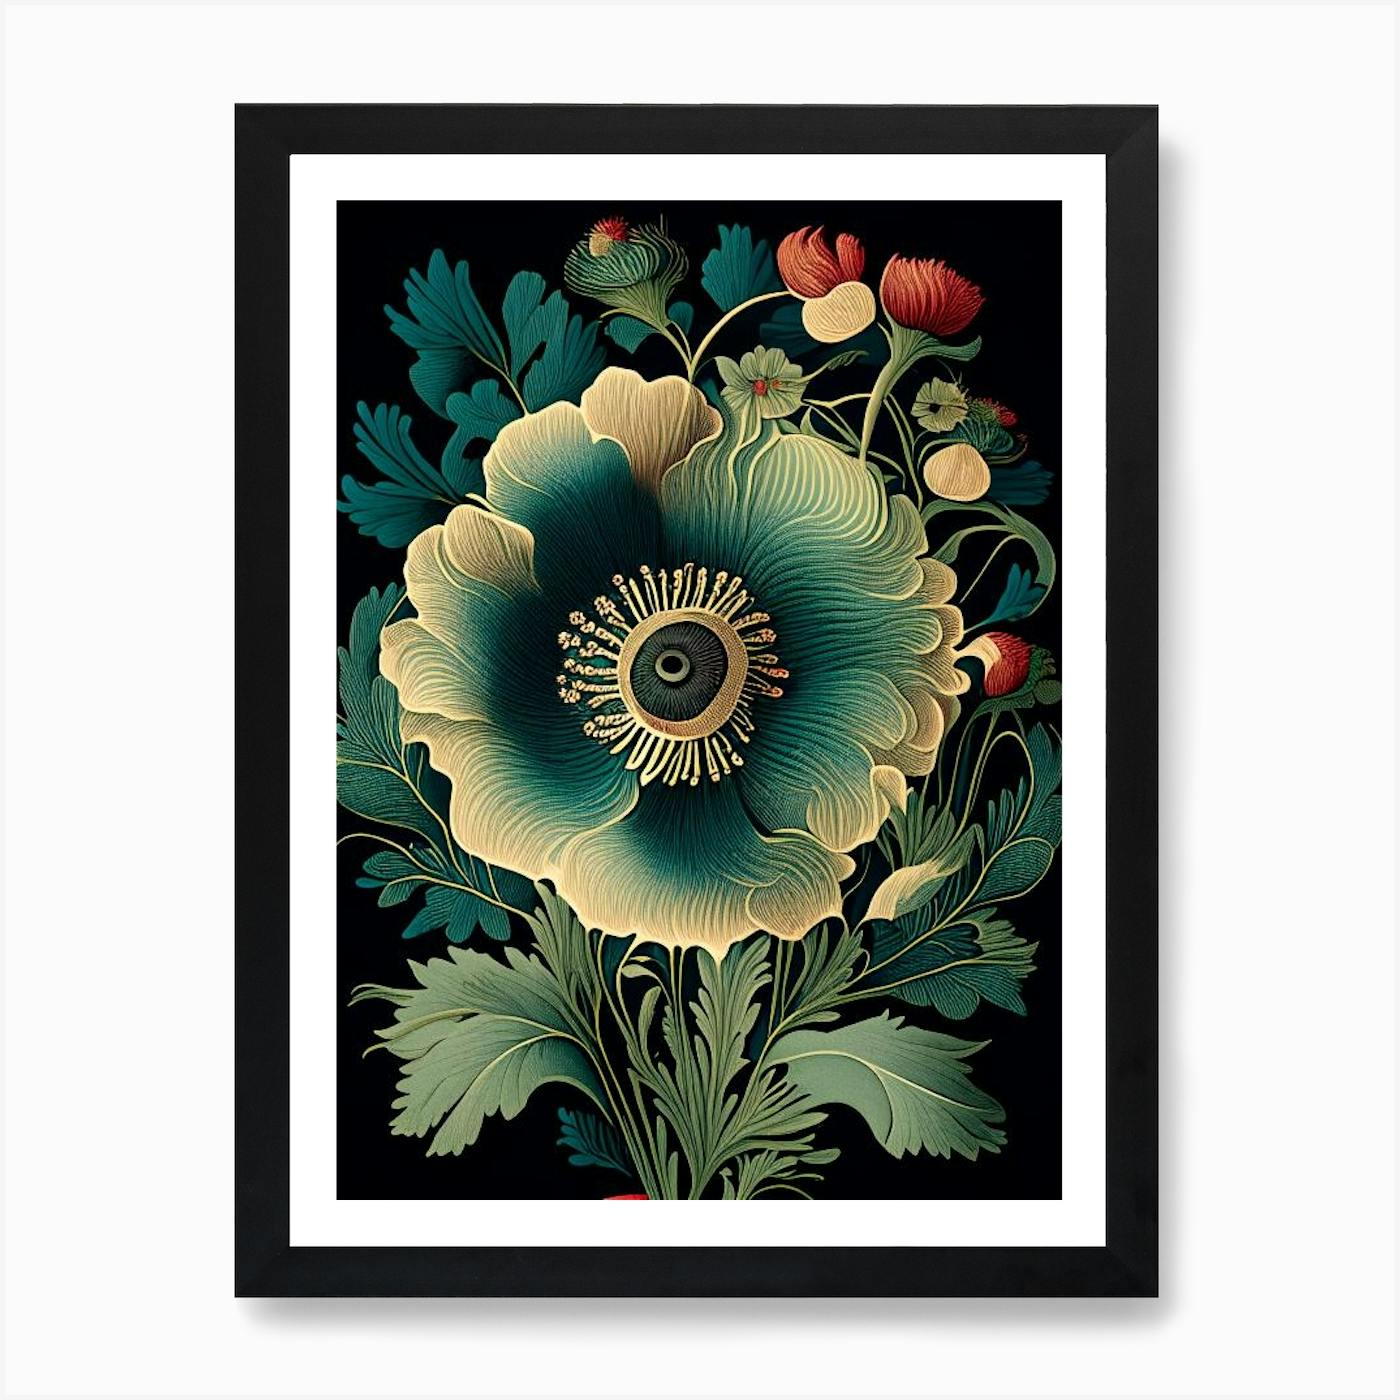 Nature Art Prints & Posters | Fast shipping & free returns on all